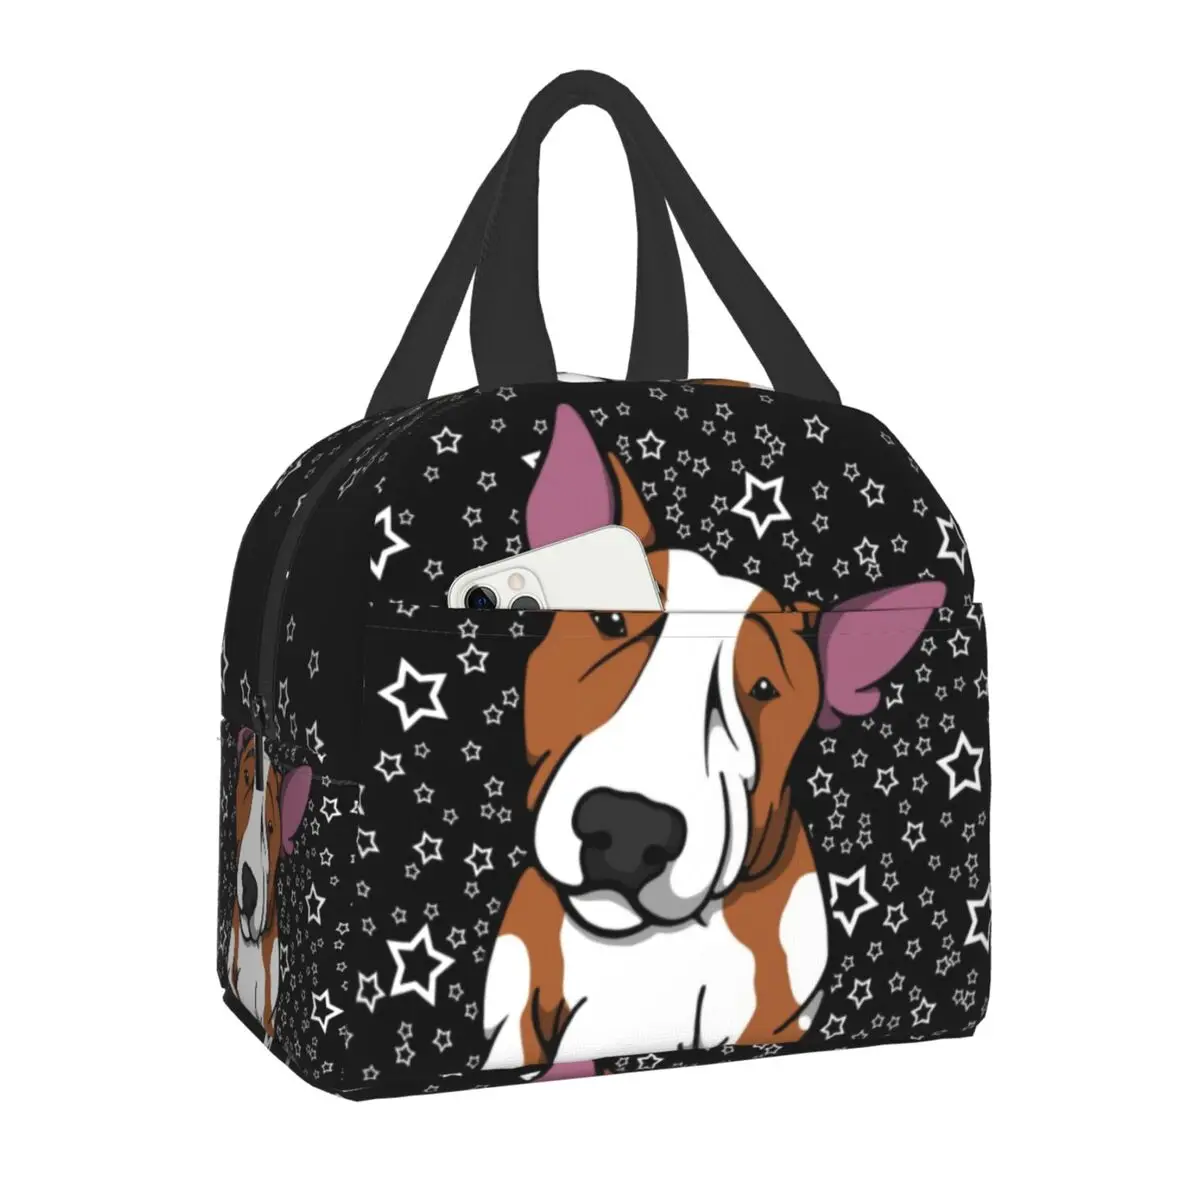 

Starry English Bull Terrier Insulated Lunch Bag for Women Pet Dog Resuable Cooler Thermal Bento Box Work School Travel Bags